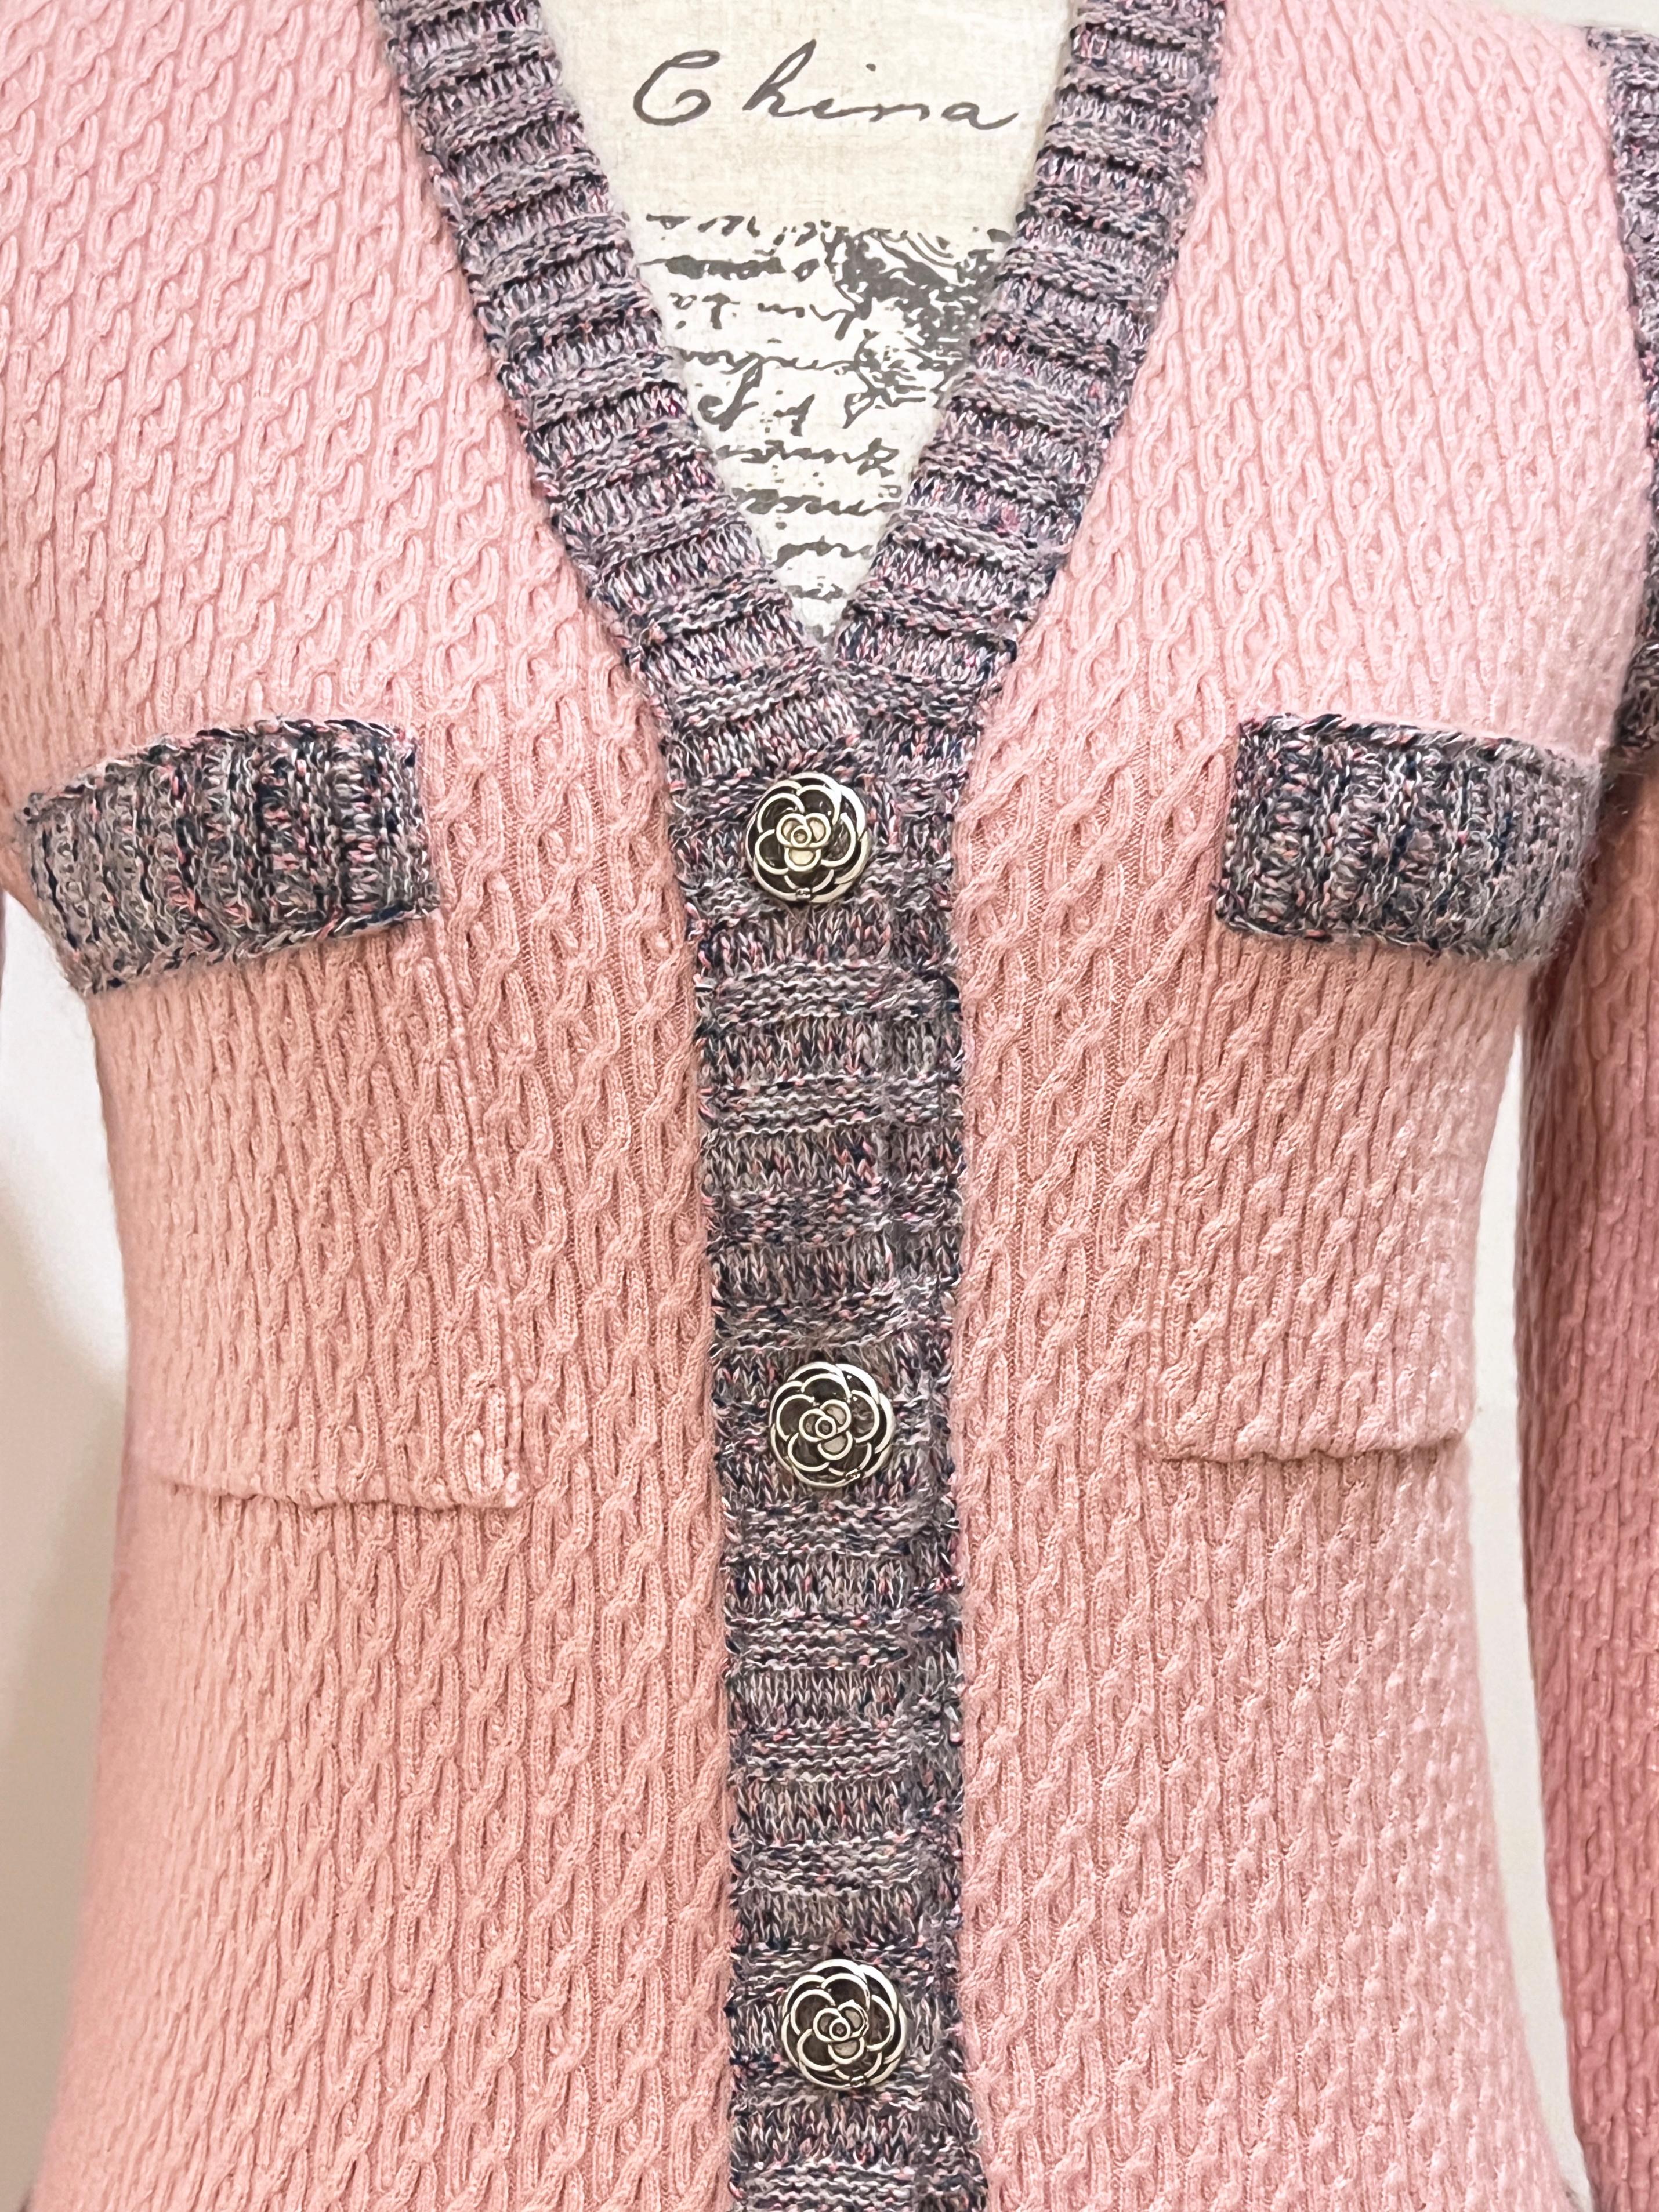 Chanel Iconic Coco Brasserie Quilted Jacket Dress For Sale 7